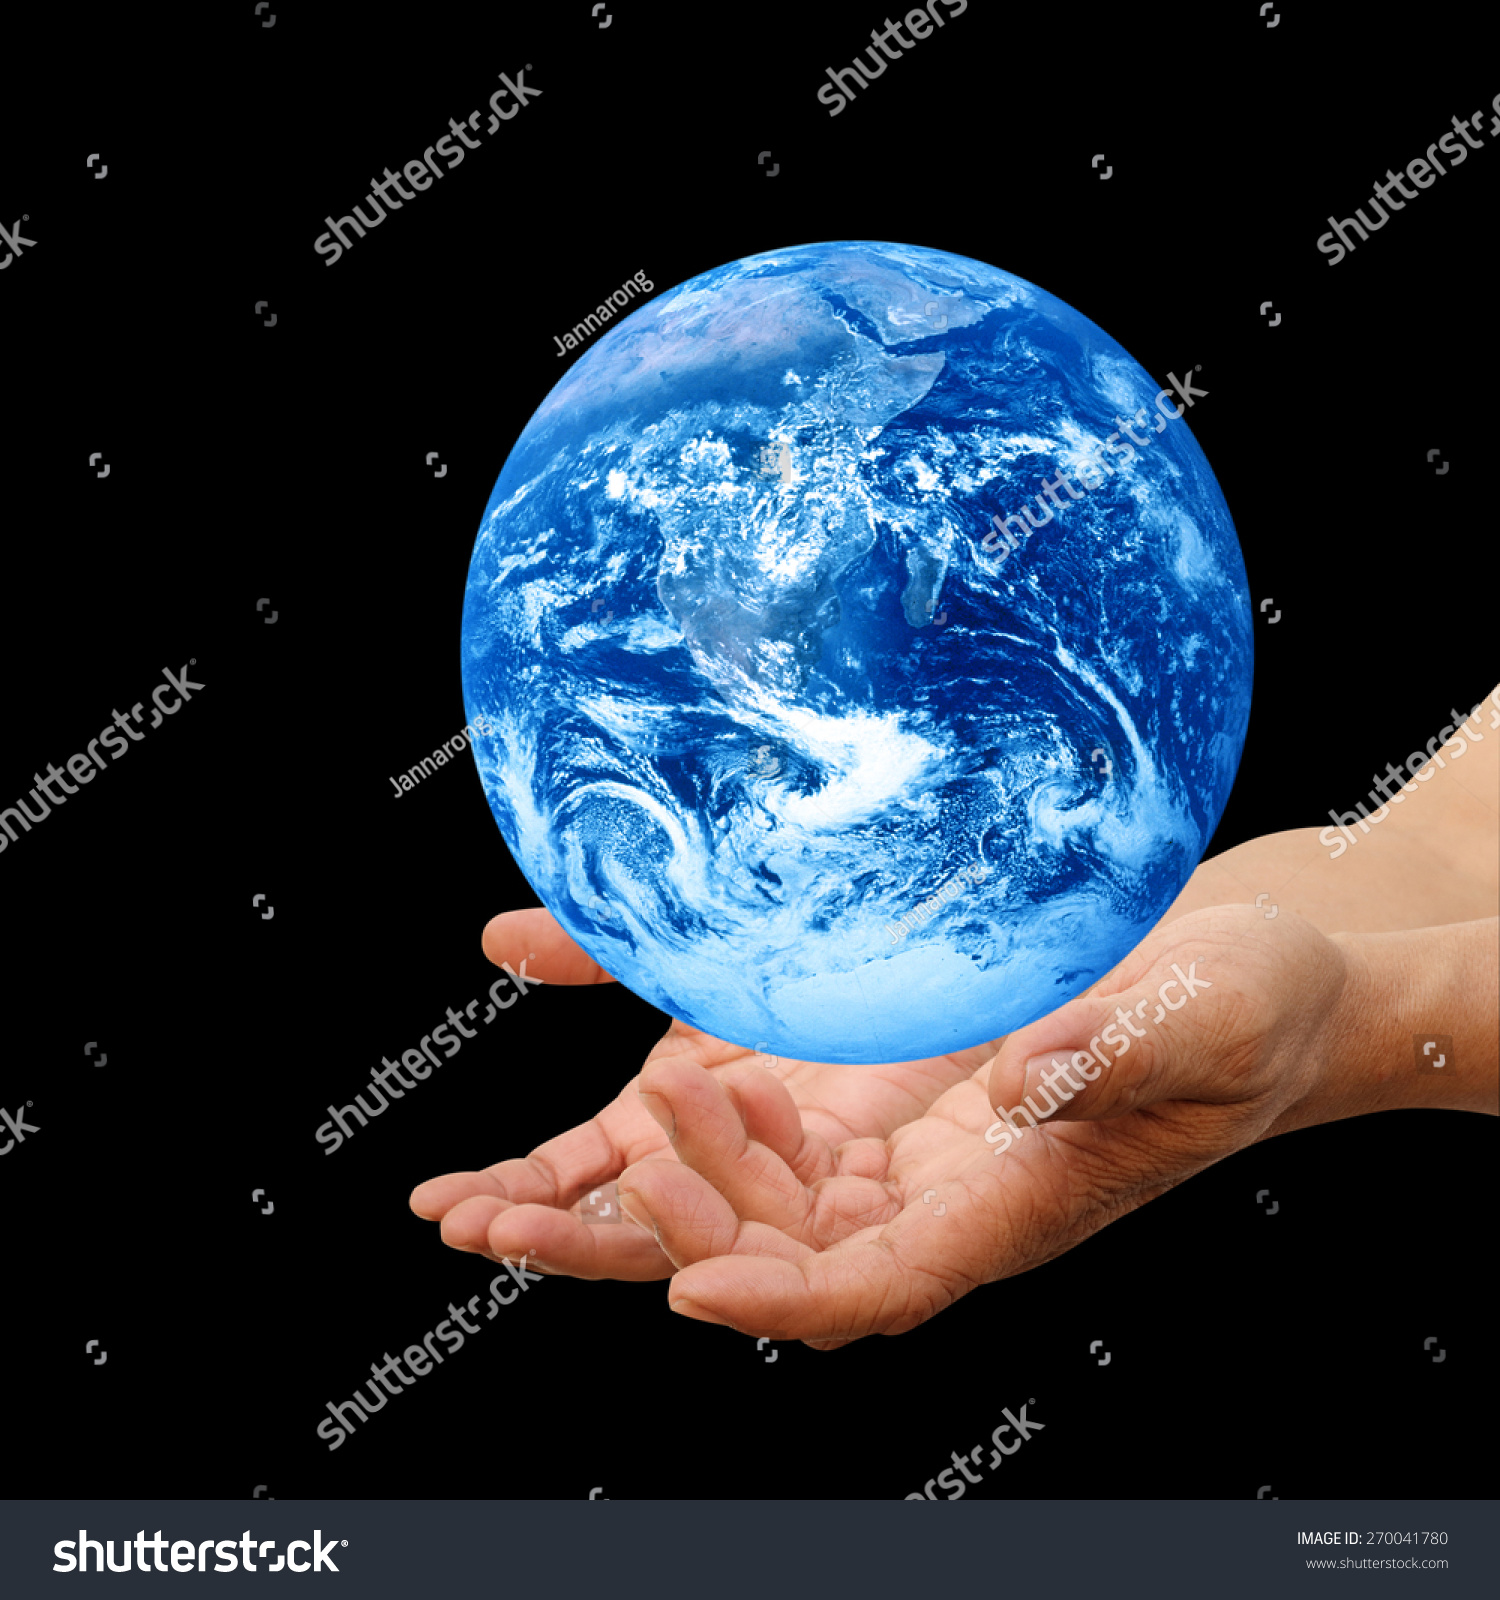 Human hands palm up with global image over white Elements of this image furnished by NASA #270041780